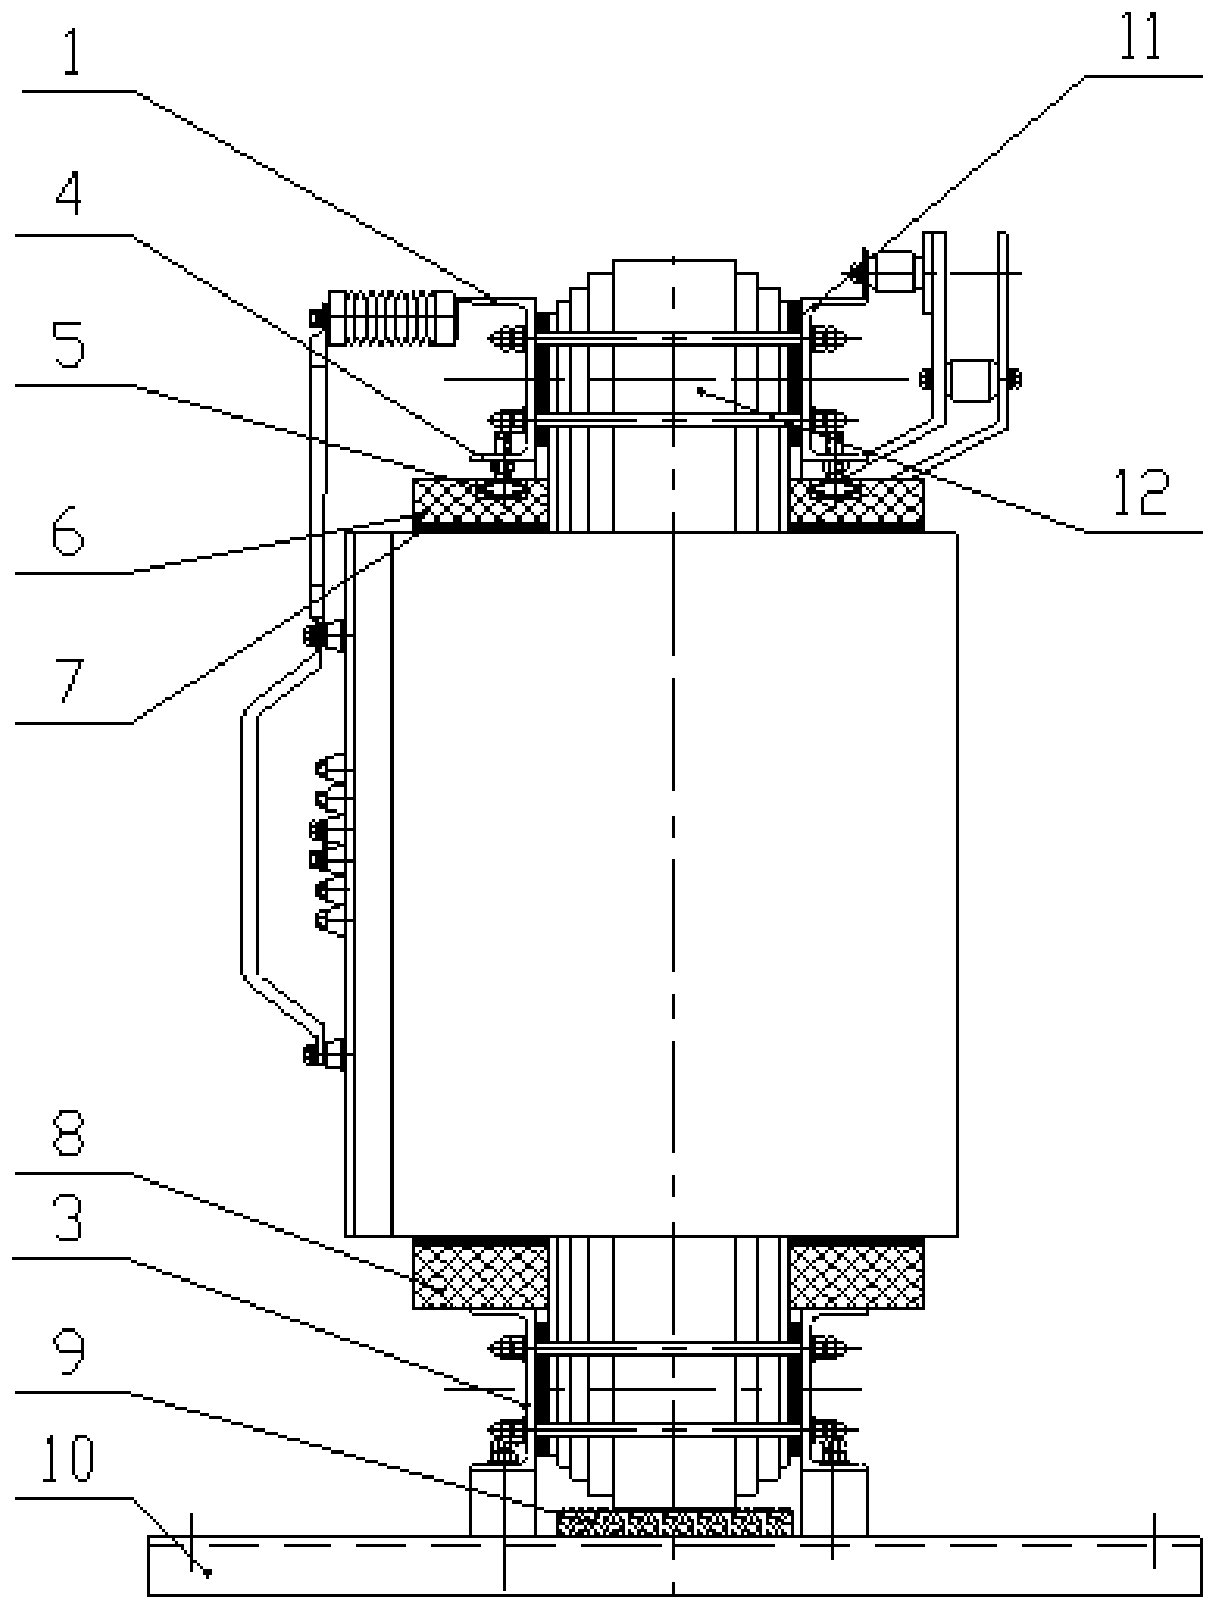 Low-noise dry-type transformer structure